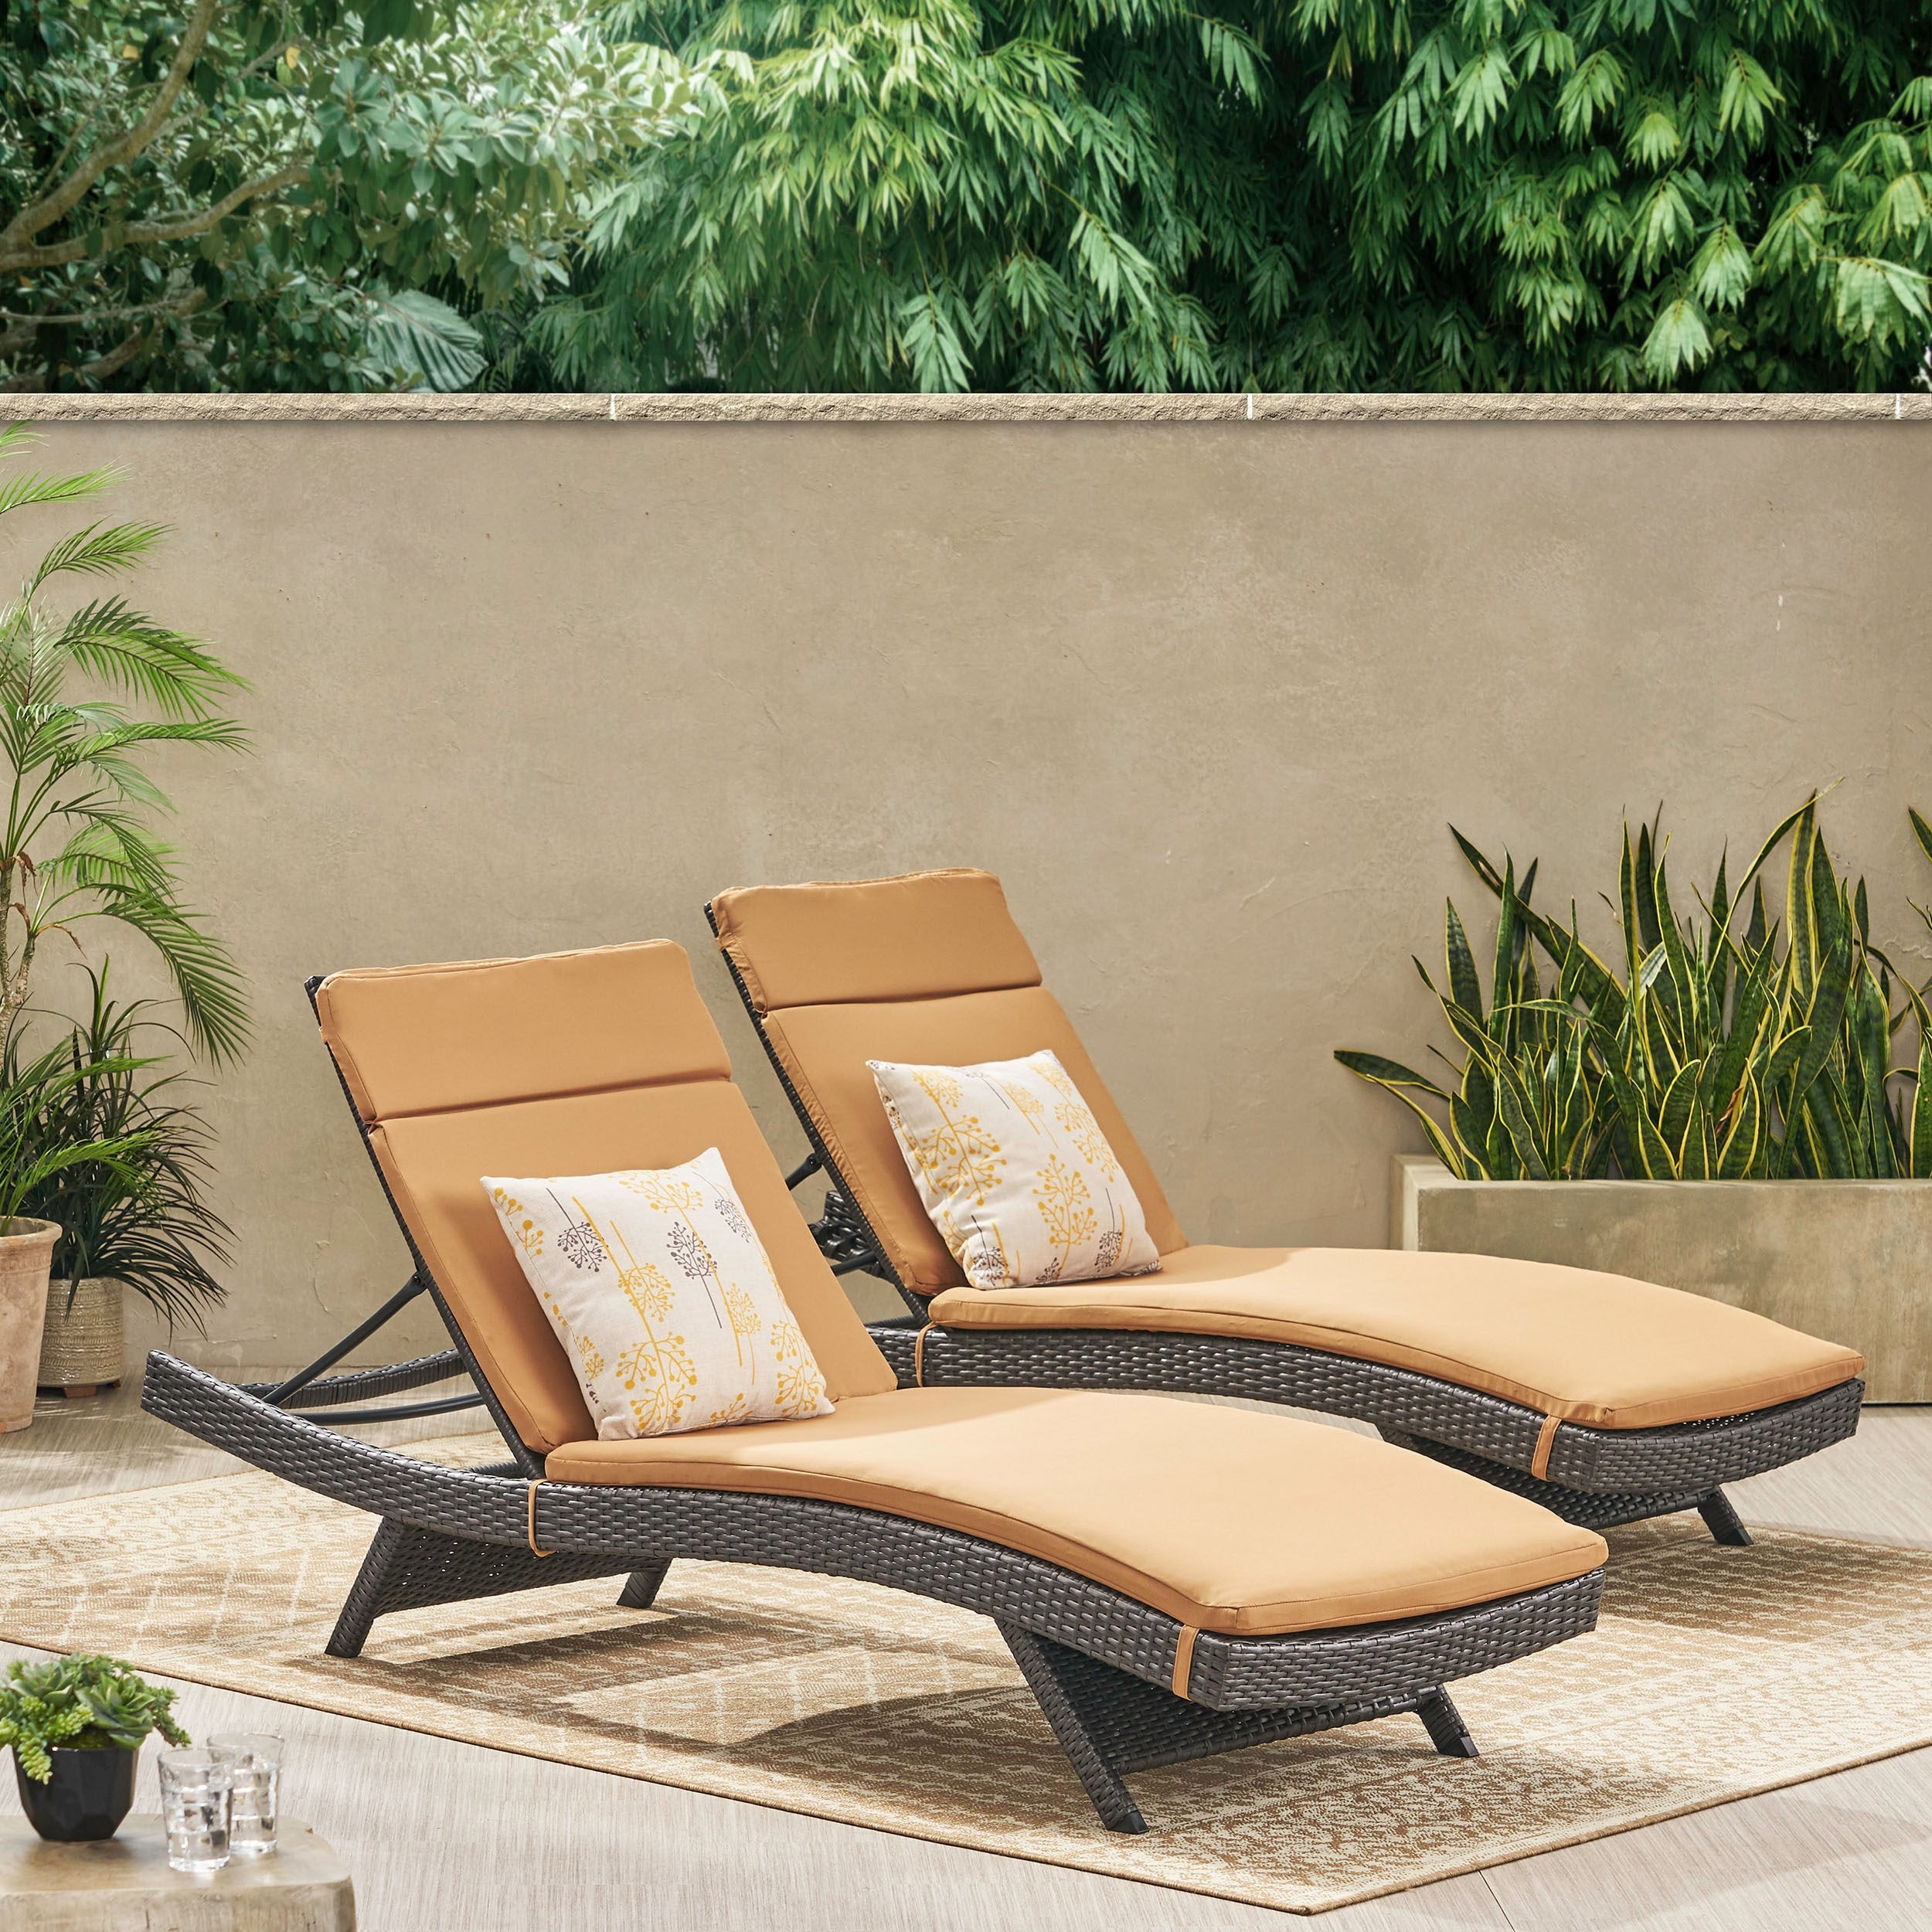 Salem Outdoor Chaise Lounge with Cushion - image 4 of 5